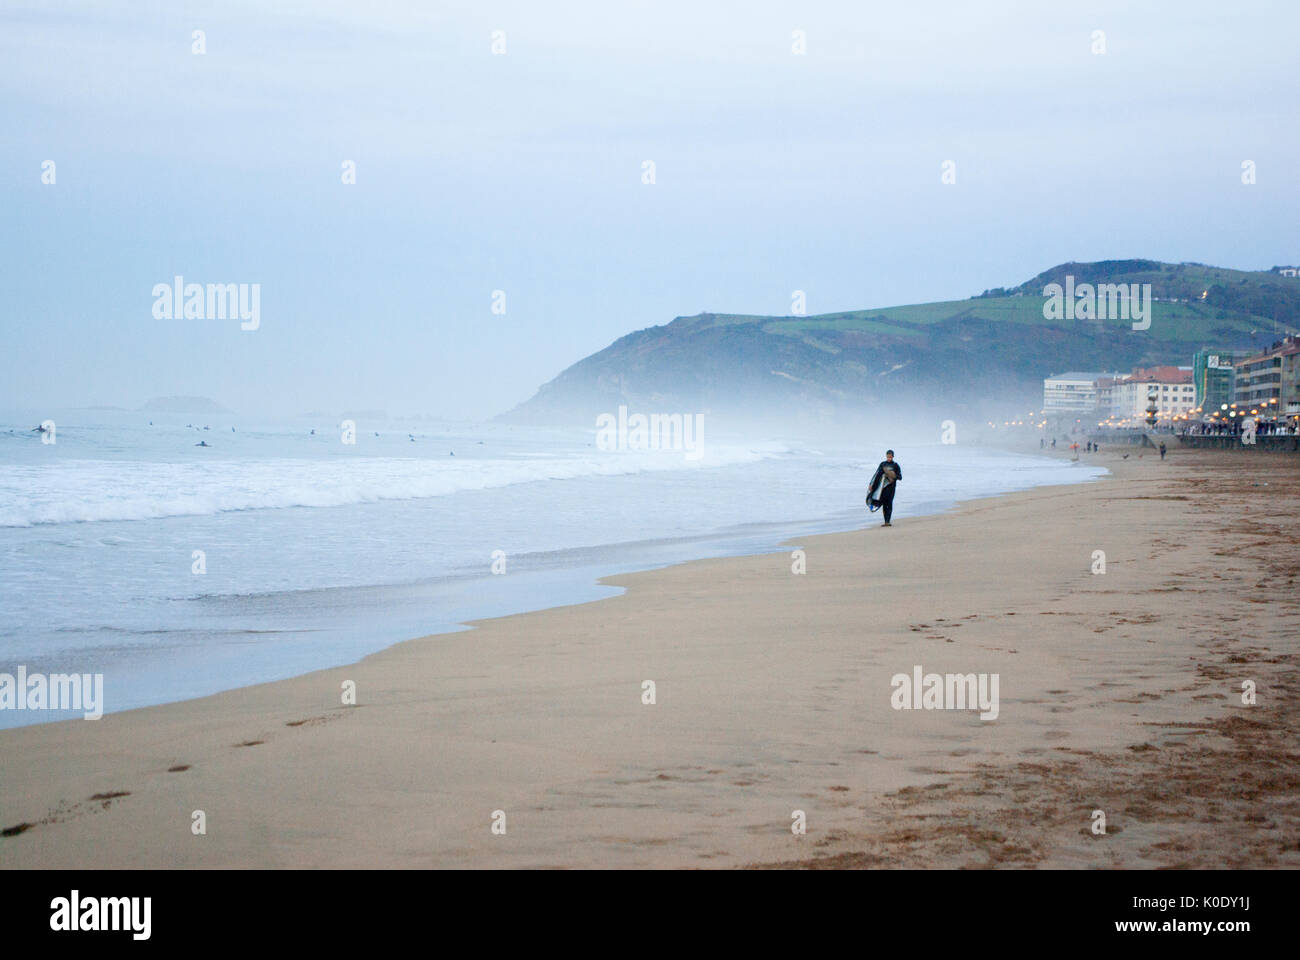 One young surfer on Zarautz beach in Basque Country, Spain Stock Photo